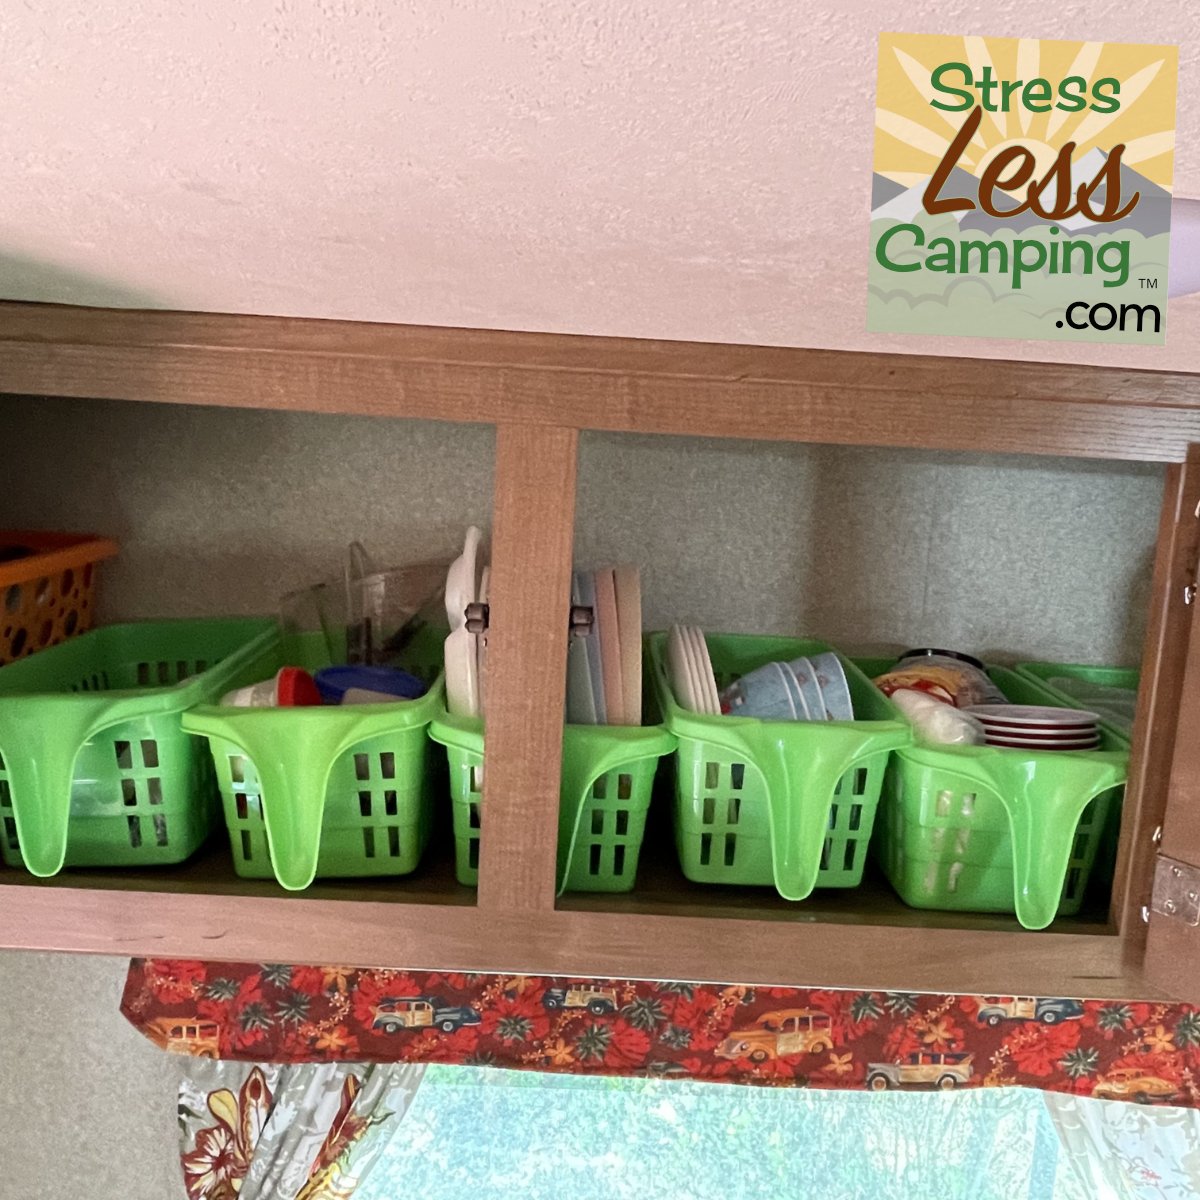 Plastic baskets organize dishes in RV cabinet